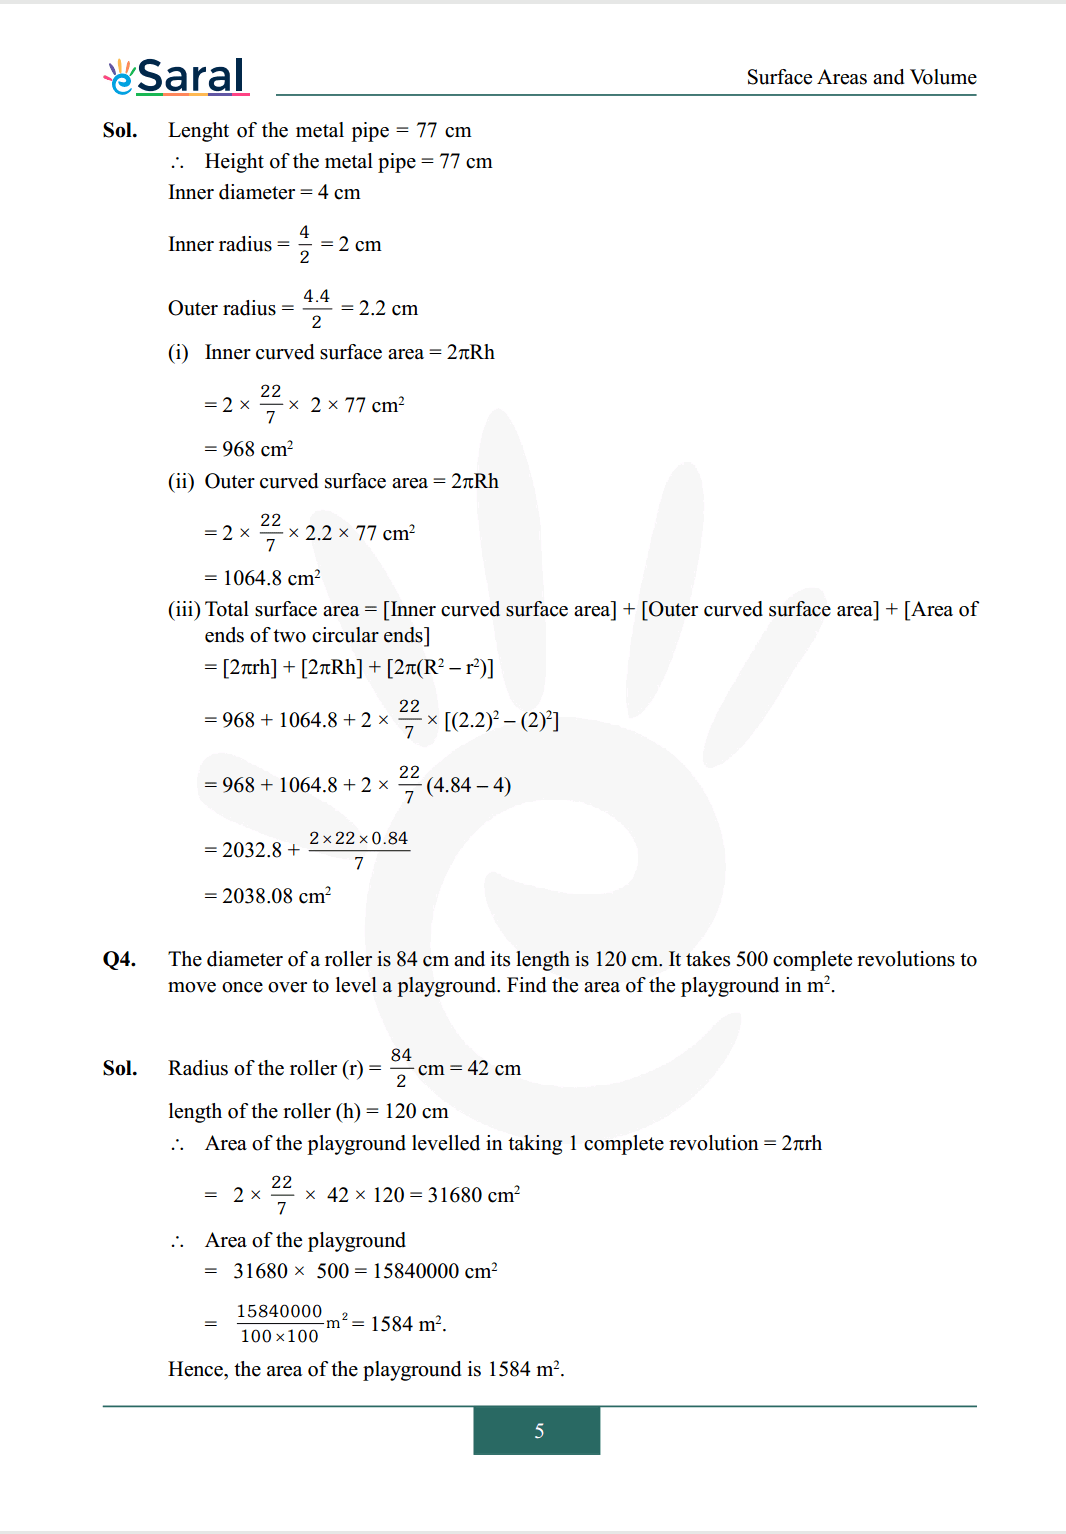 Class 9 maths chapter 13 exercise 13.2 solutions Image 2